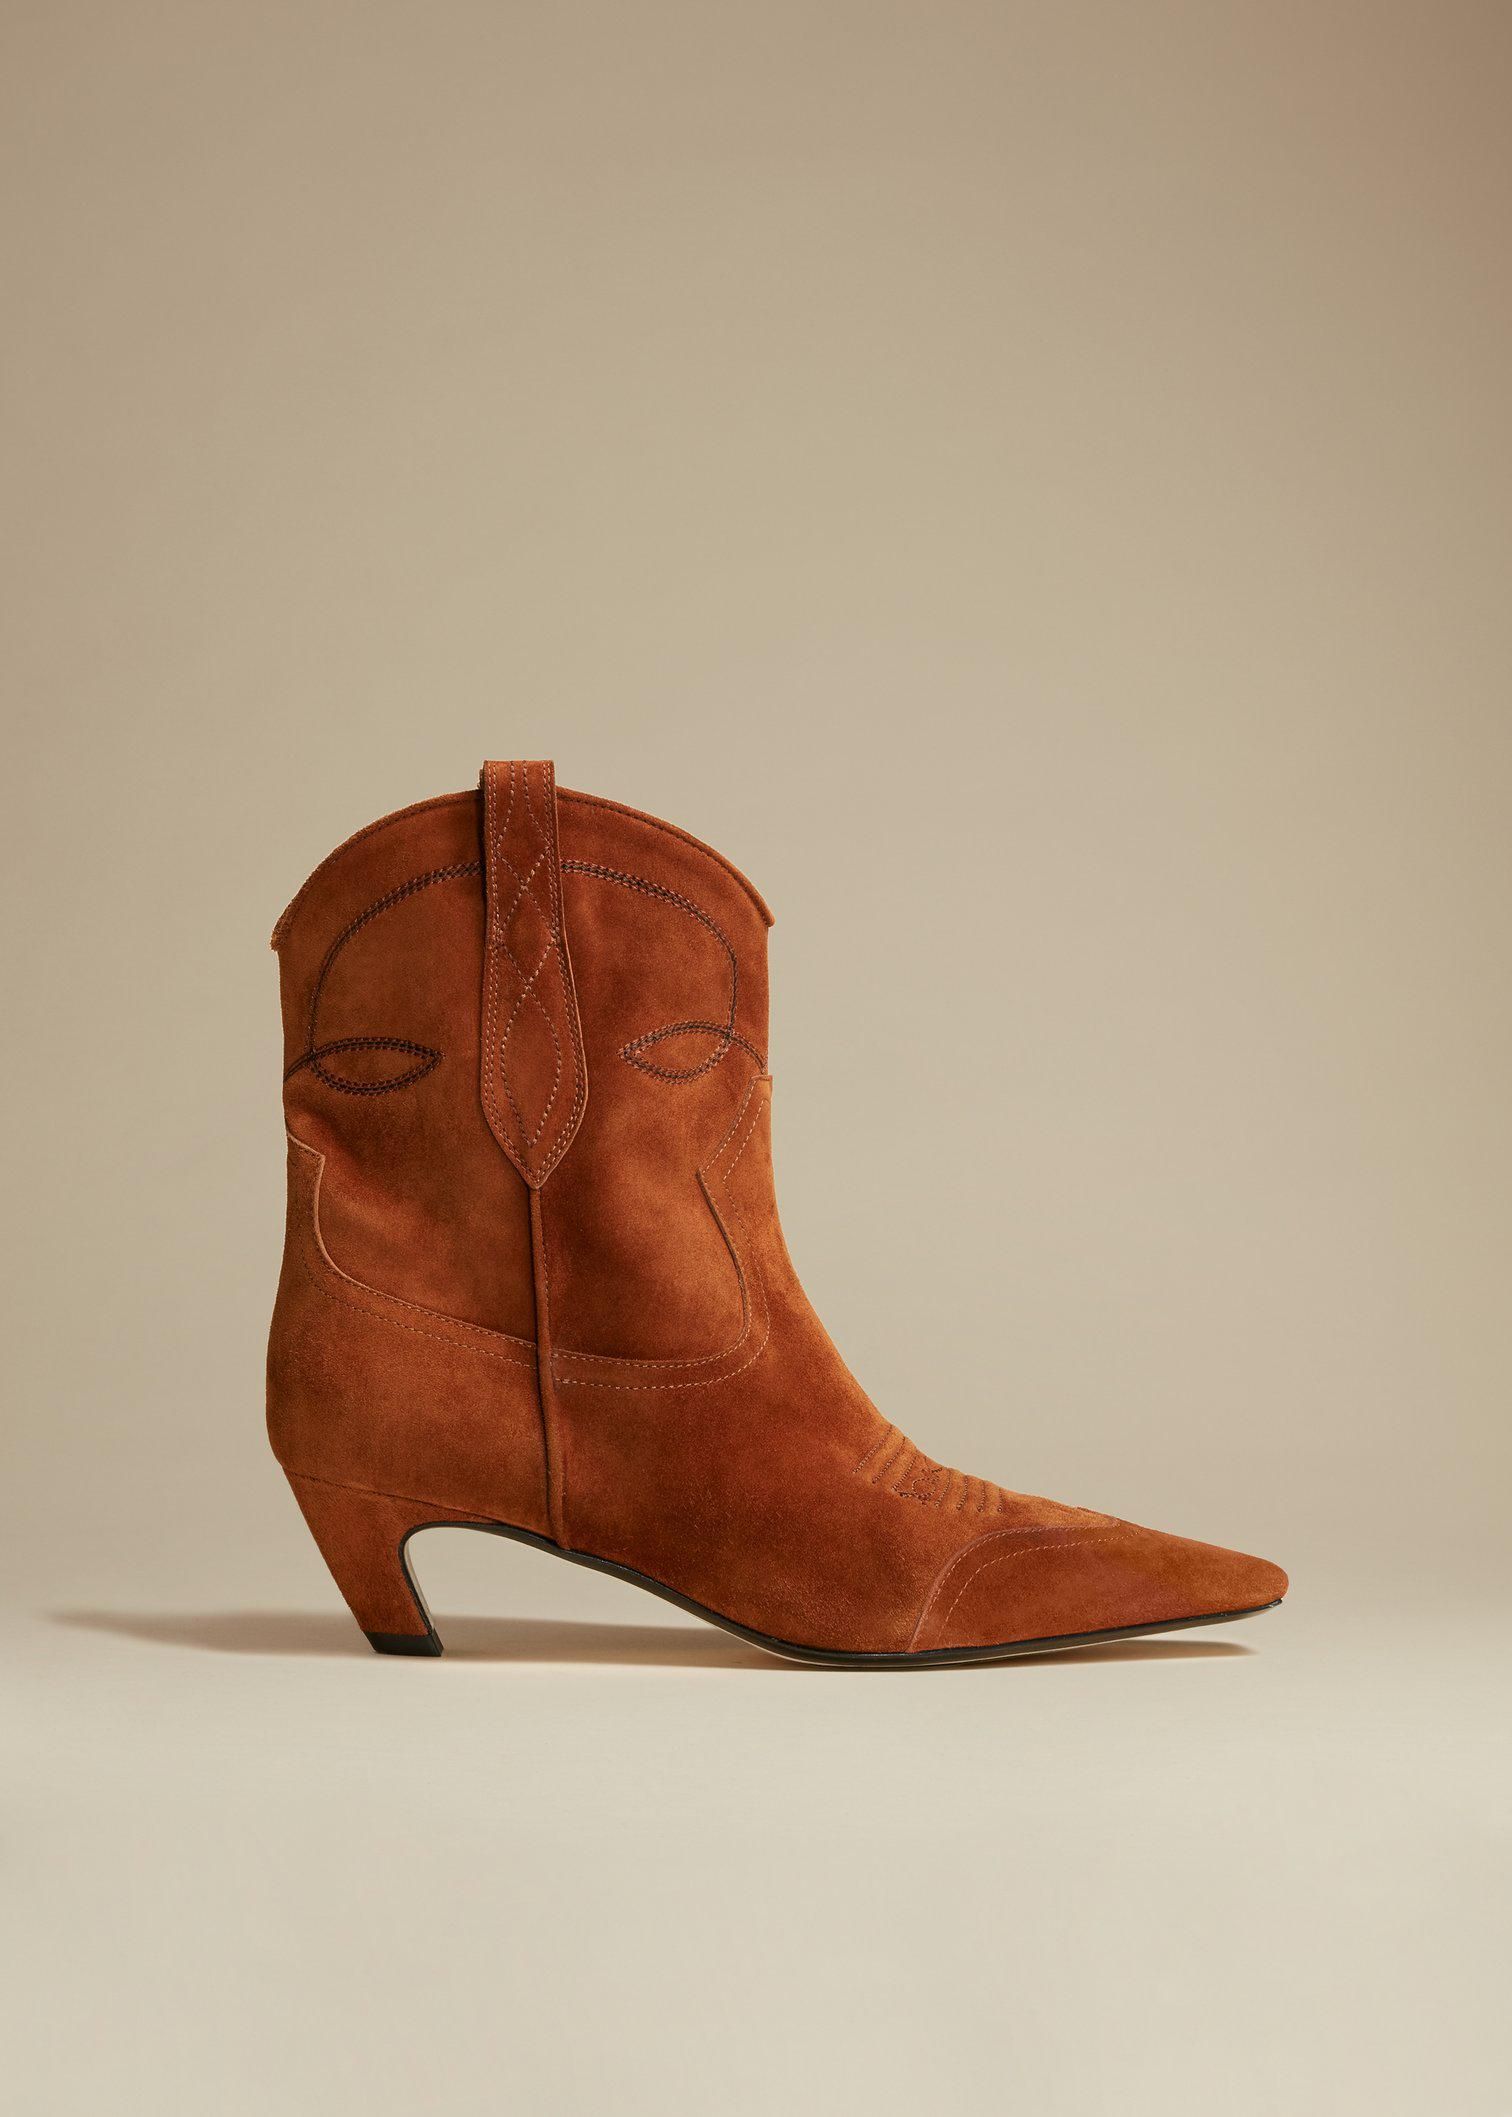 The Dallas Ankle Boot